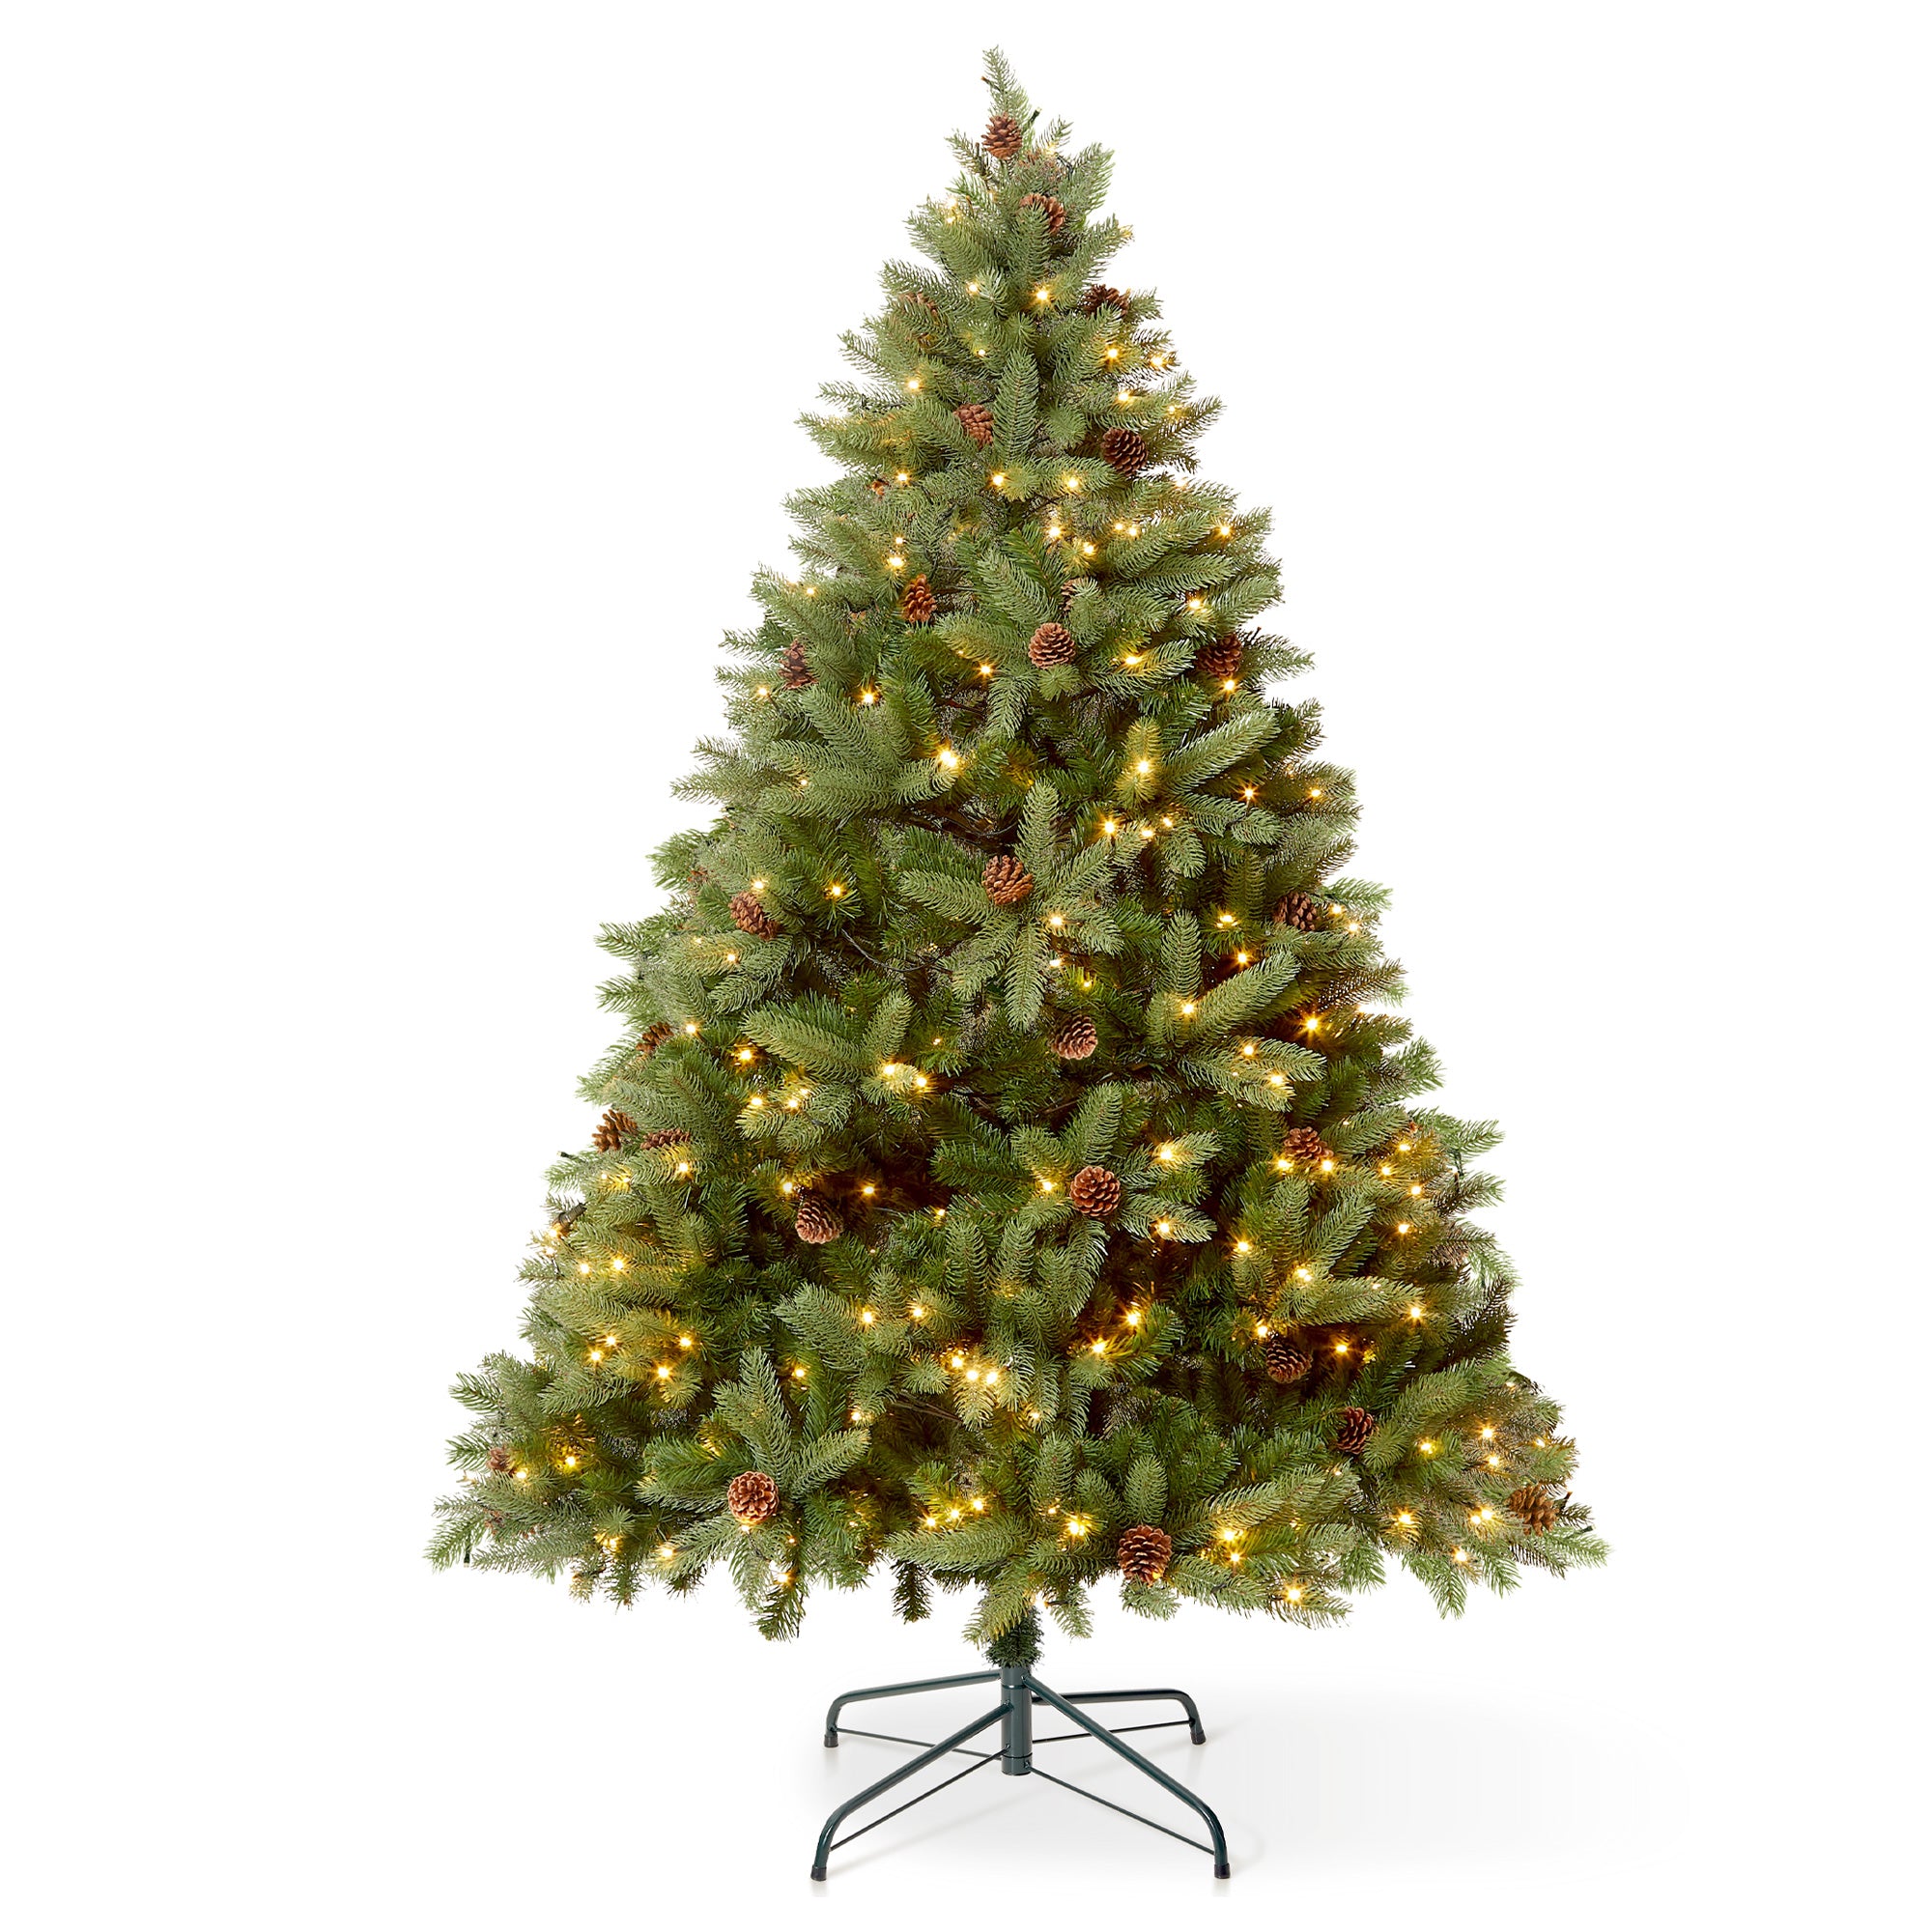 VeryMerry 5FT 'Ascot' Pre-Lit Christmas Tree with 200 Built-In Warm White LED Lights with Auto-Off Timer, 8 Lighting Modes and Real Decorative Pinecones